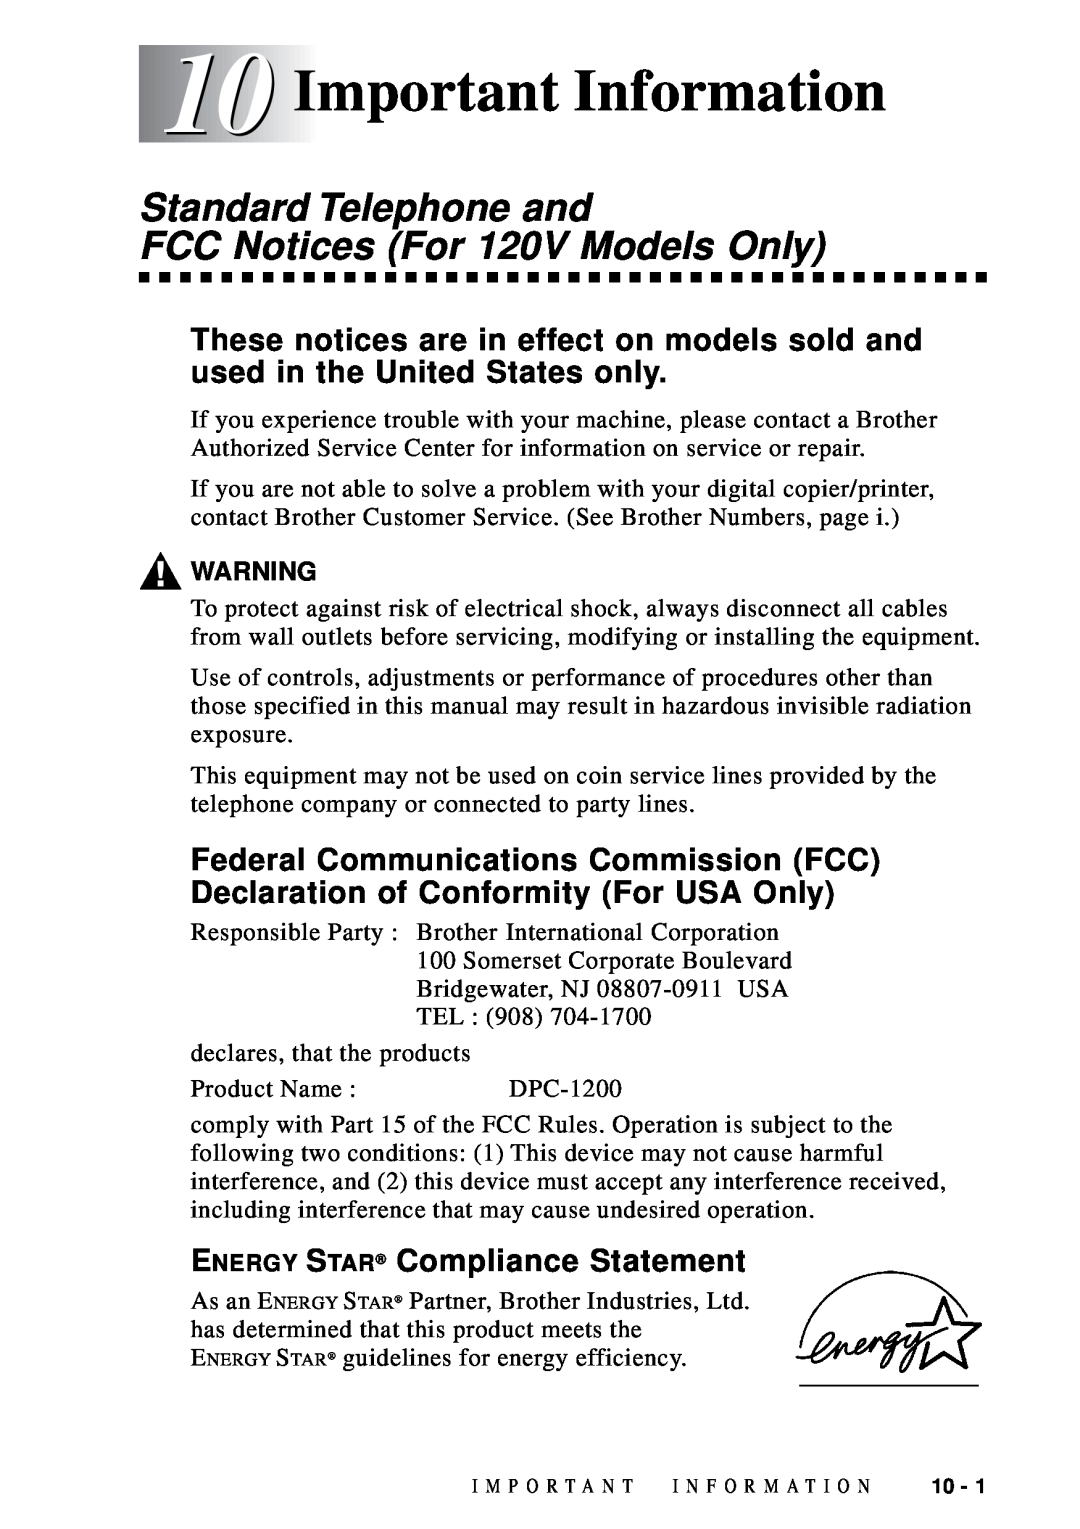 Brother DCP1200 manual Important Information, Standard Telephone and FCC Notices For 120V Models Only 